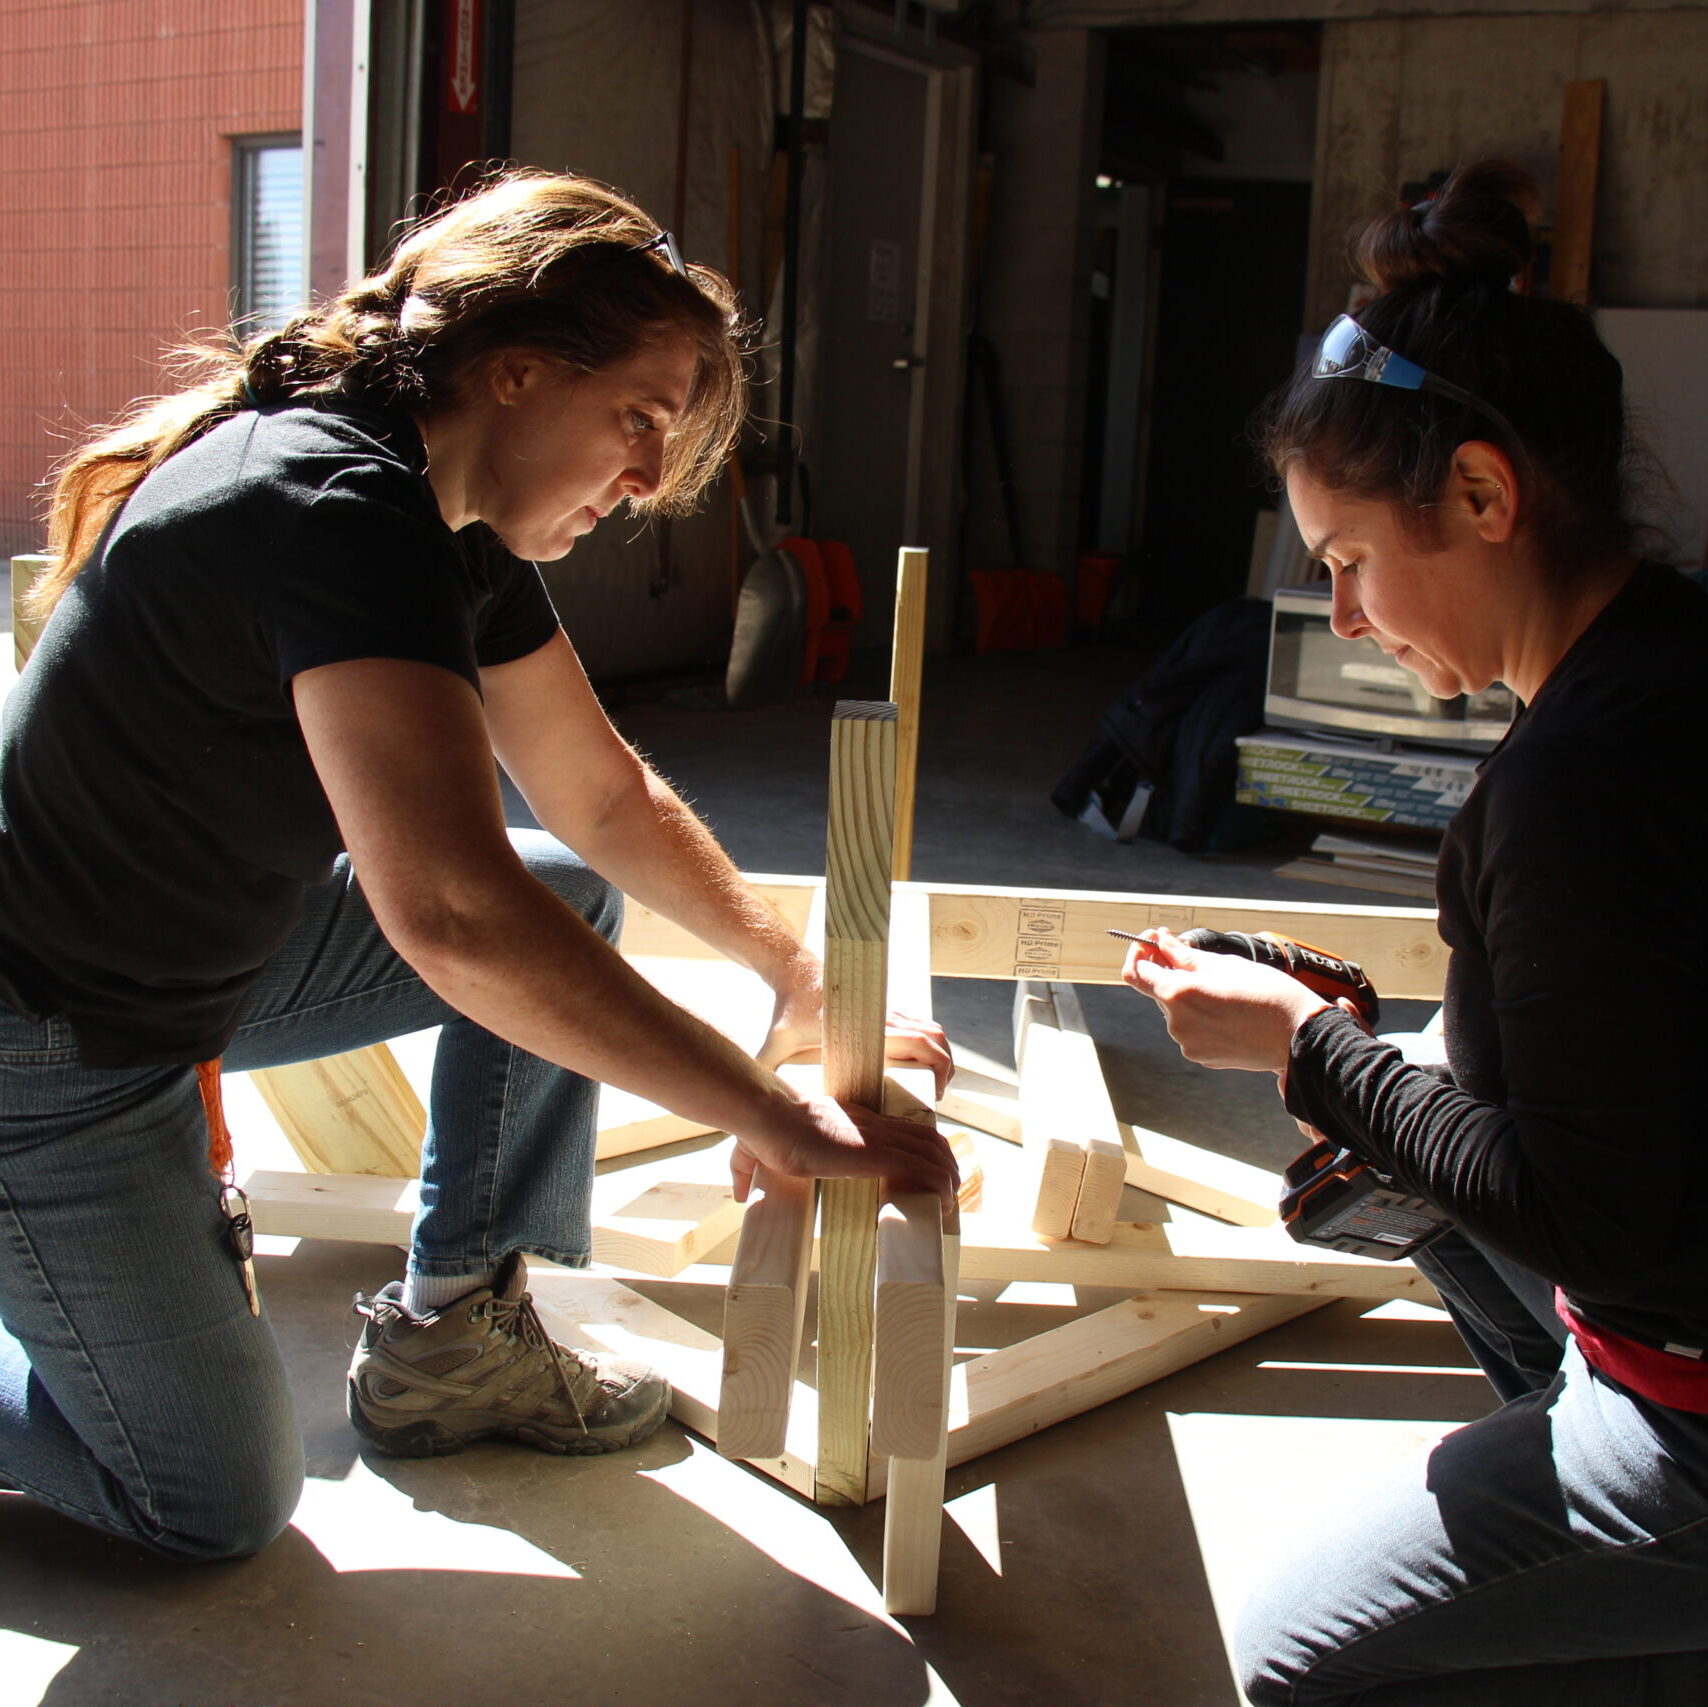 Two women work together to build a picnic table at Trailblazers, Vermont Works for Women's trades training program for women.